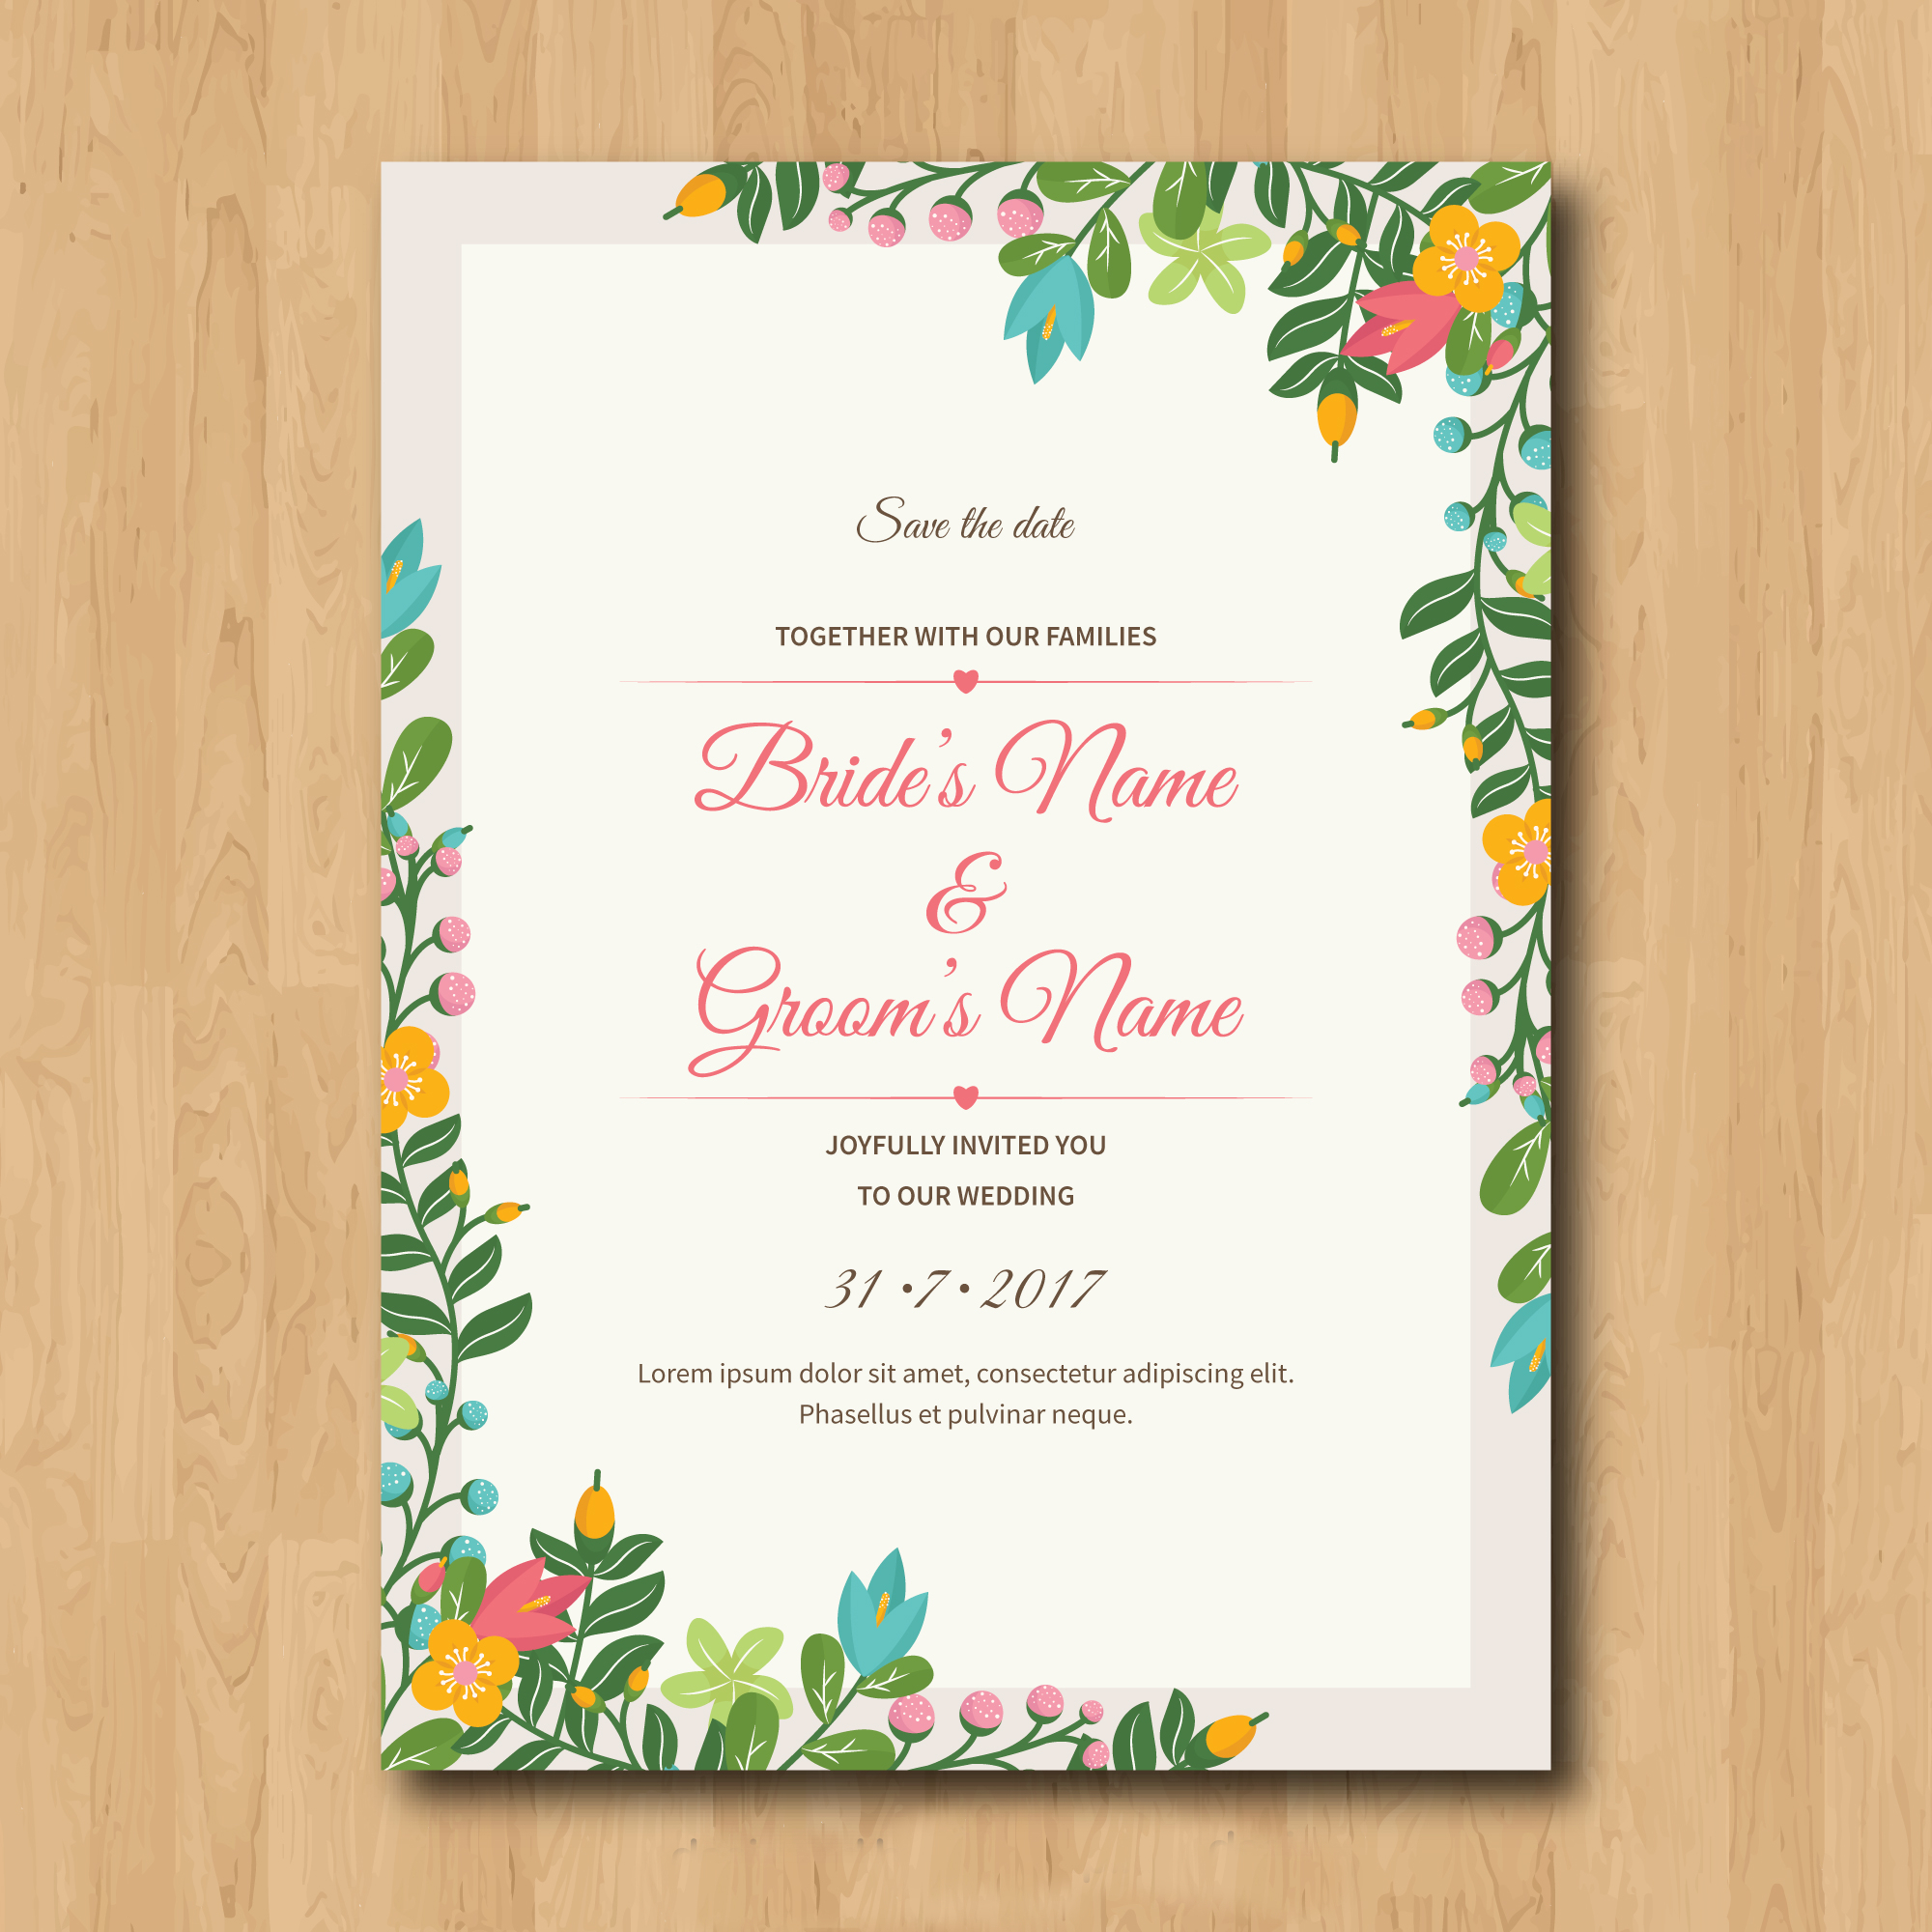 Wedding Invitation with Floral Frame